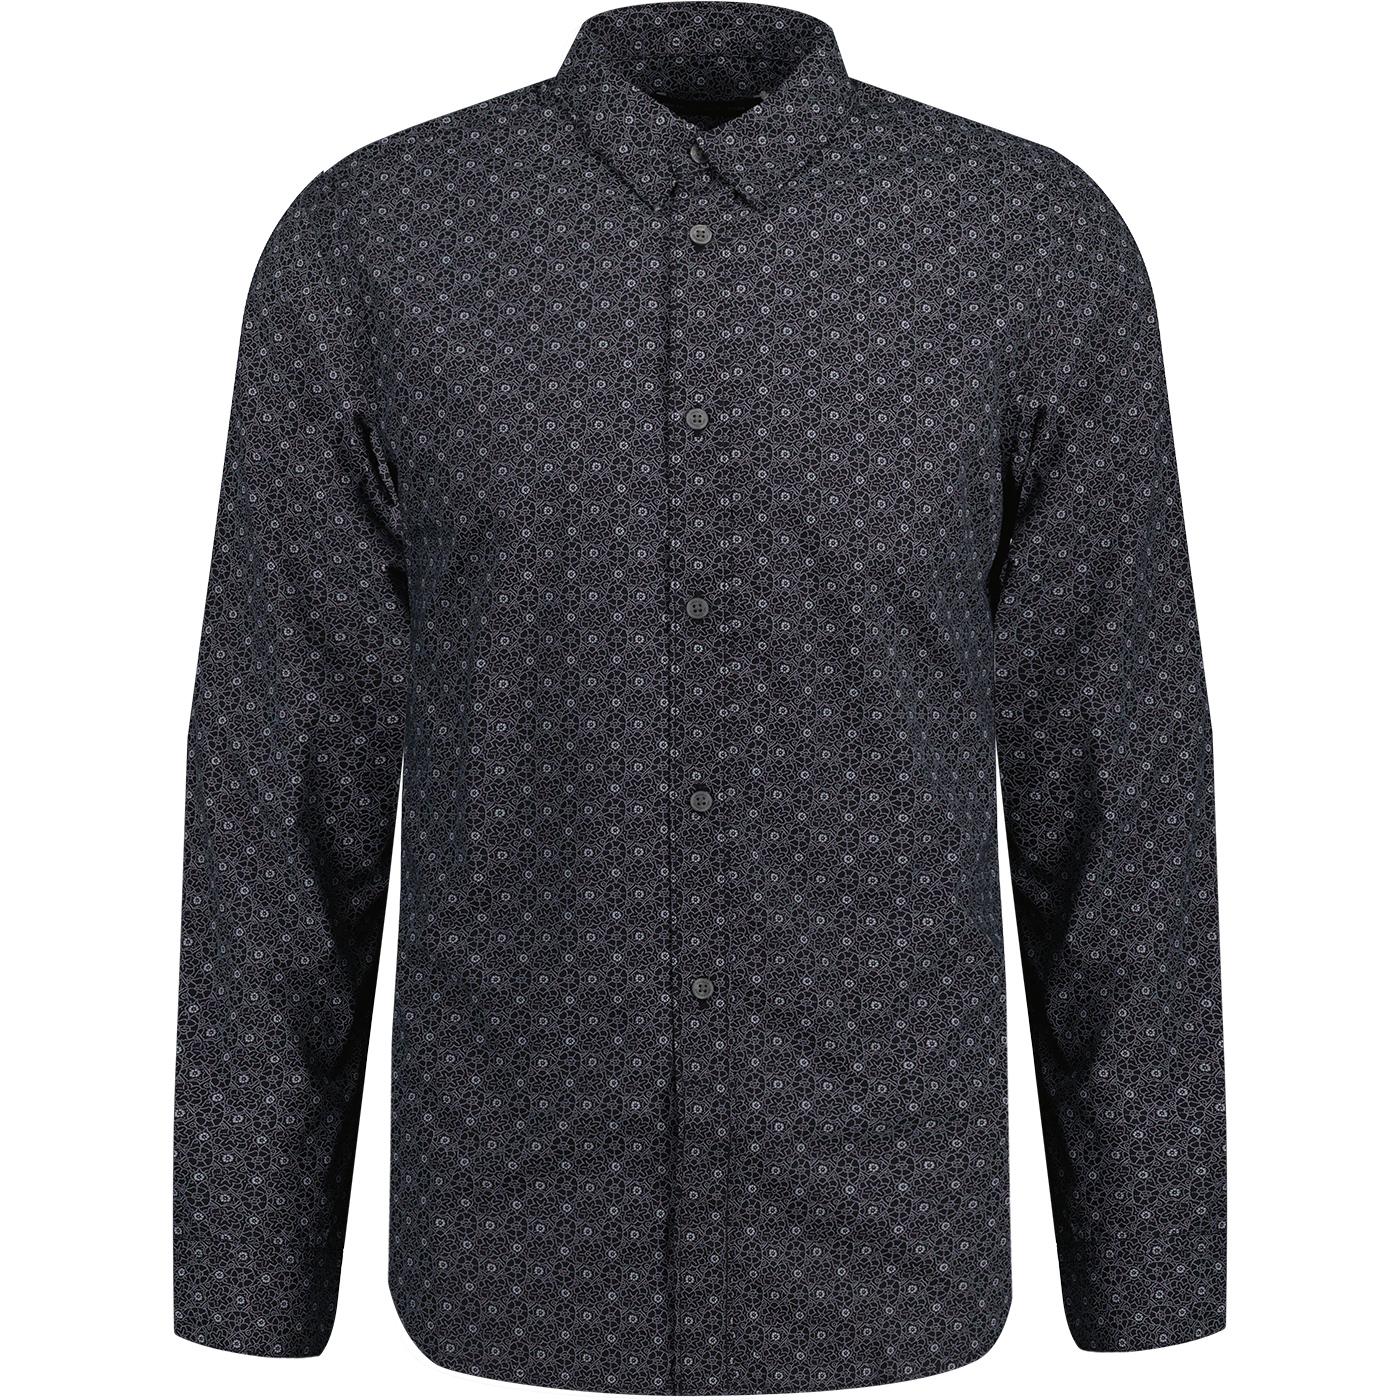 French Connection Floral Print Shirt Black